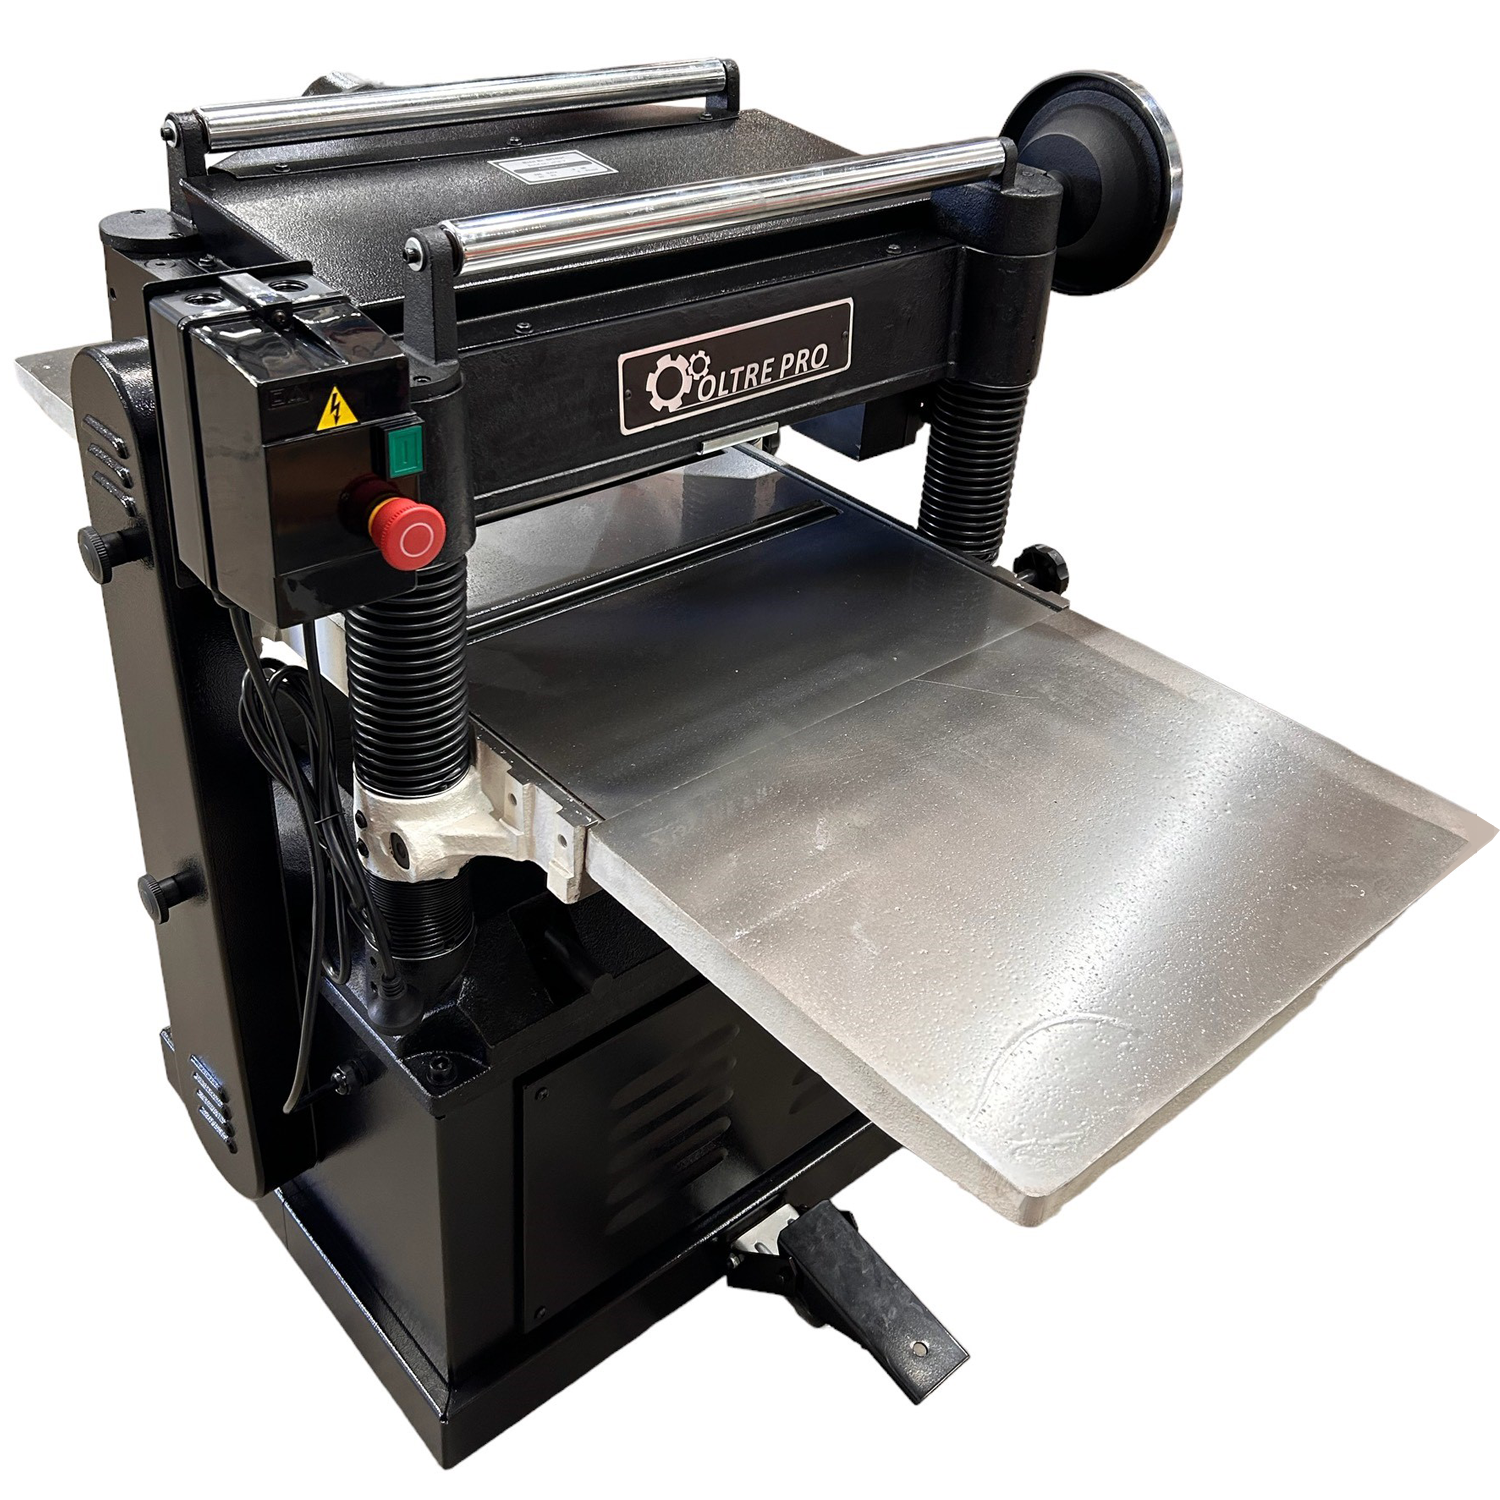 510mm (20") Thicknesser with Spiral Head Cutter Block 240V OT-P-510 (W0201) by Oltre